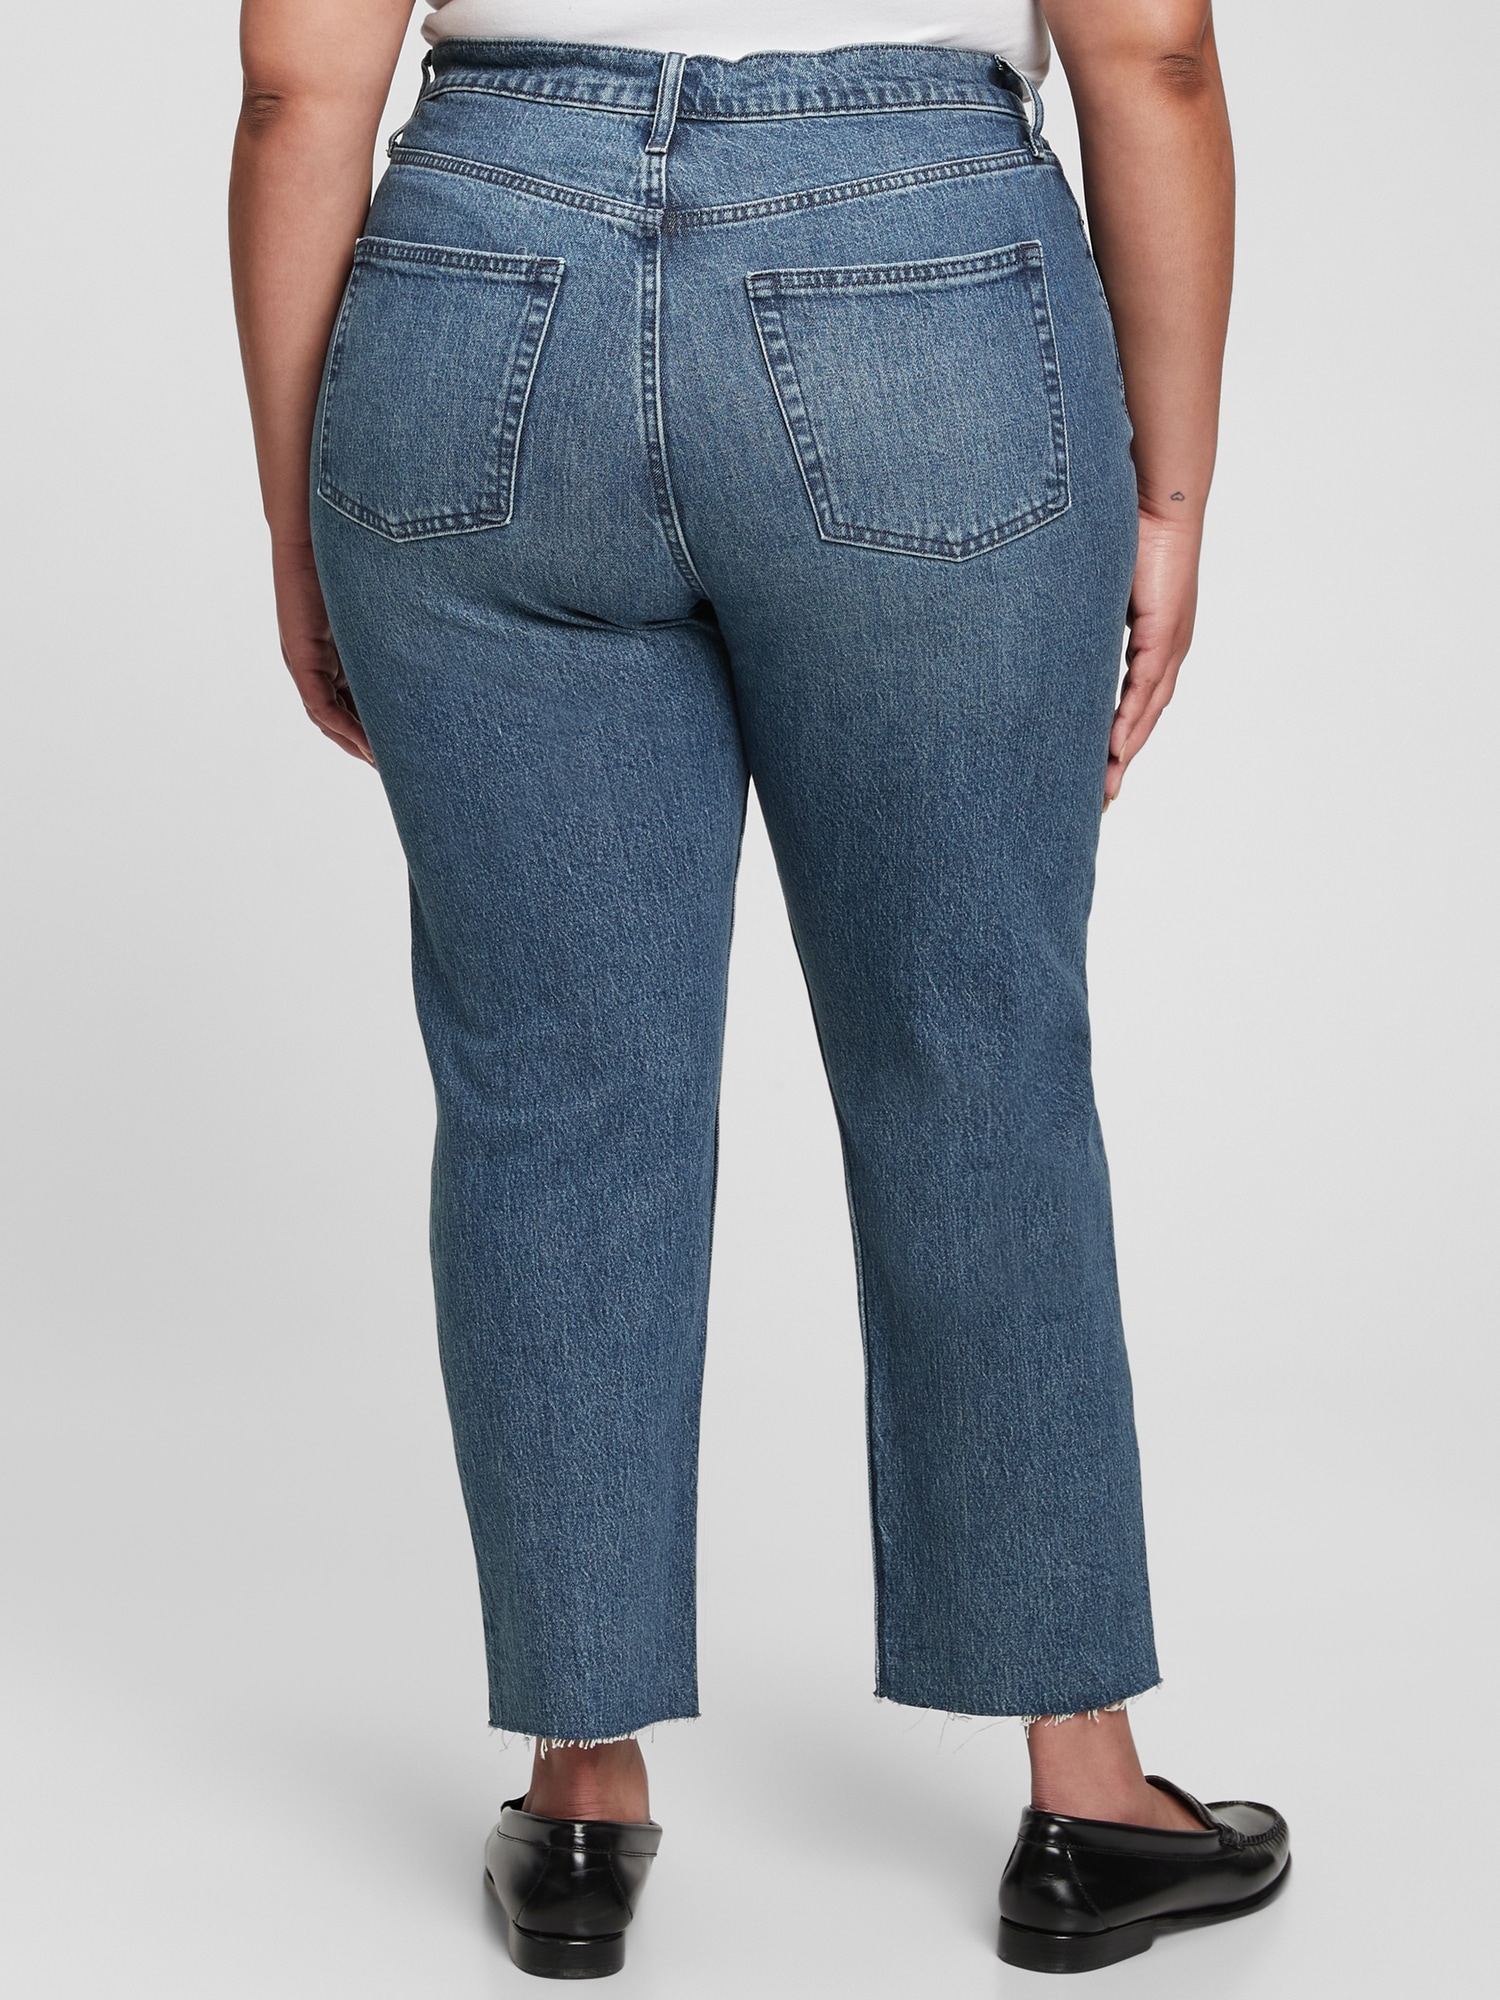 Sky High Rise Cheeky Straight Jeans with Washwell | Gap